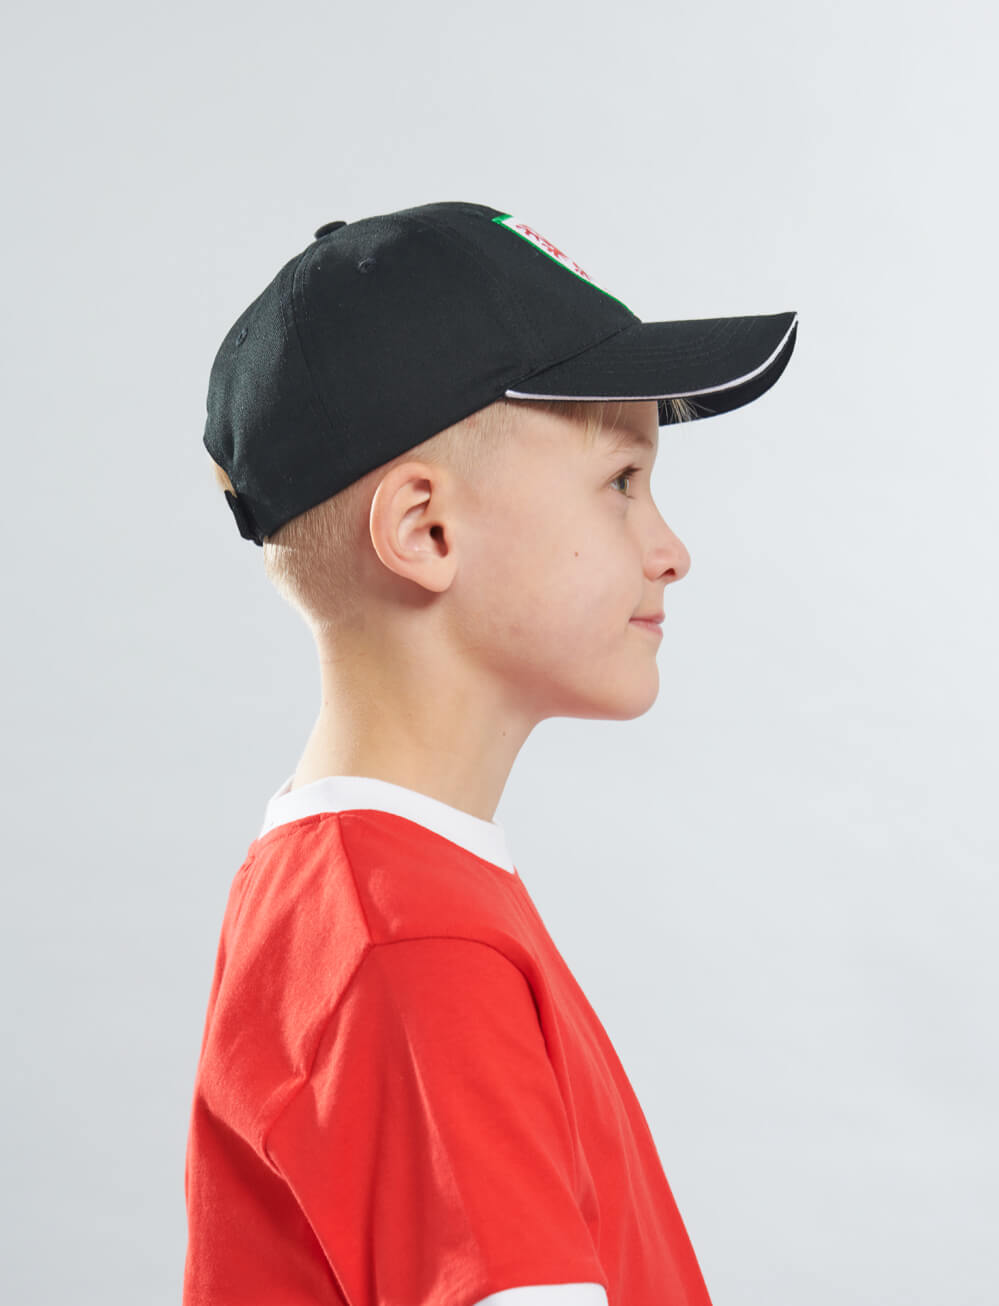 Official Team Wales Kids Cap - Black - The World Football Store